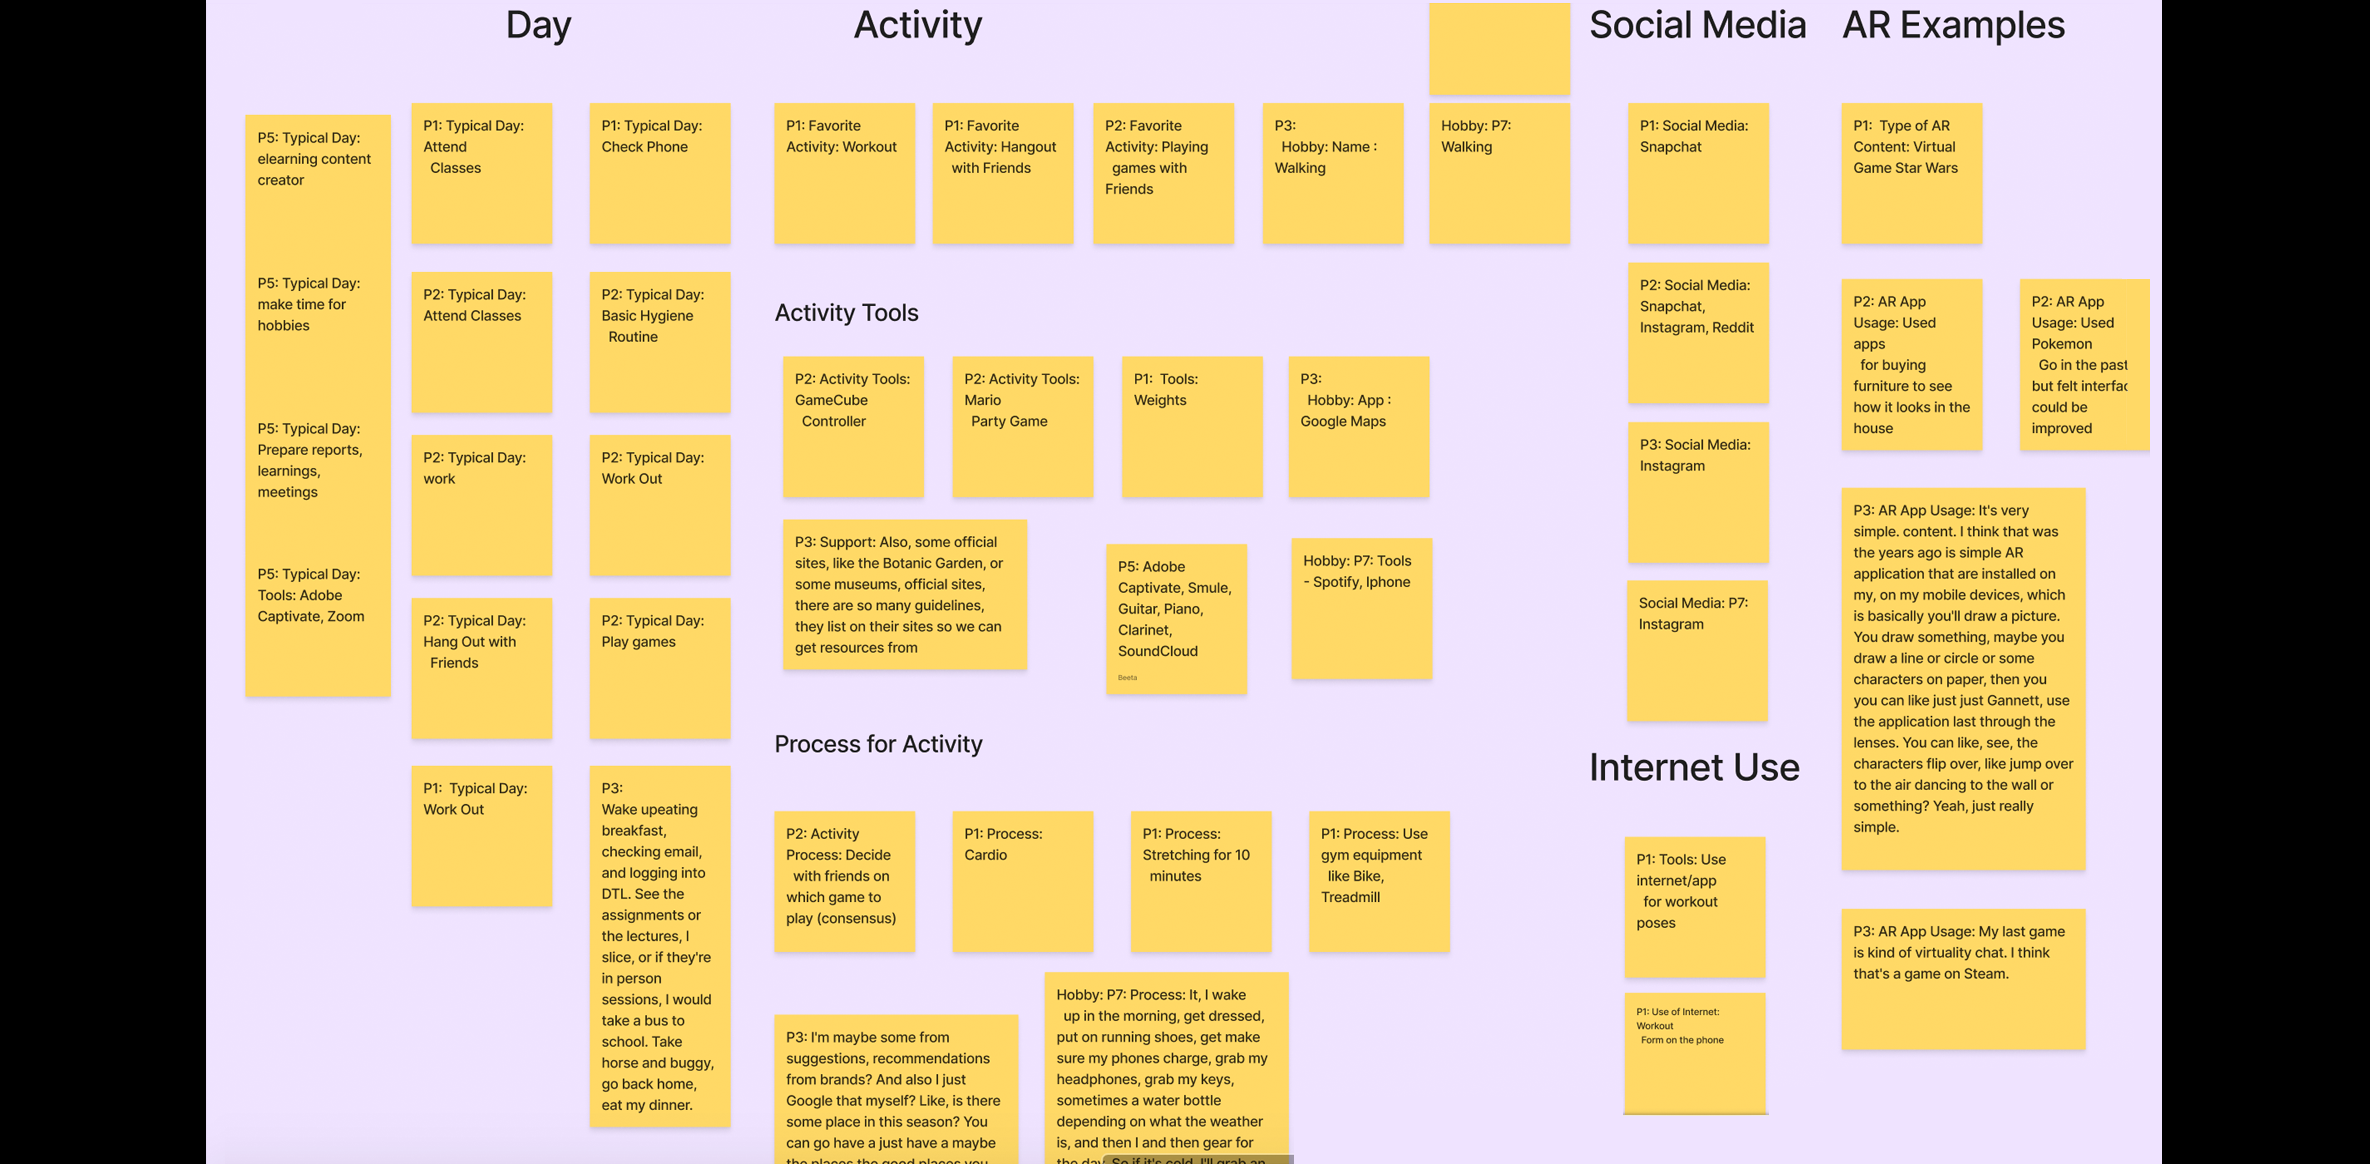 Novice Affinity Diagram for Activities and Hobbies, Social Media, and AR Examples categories. 